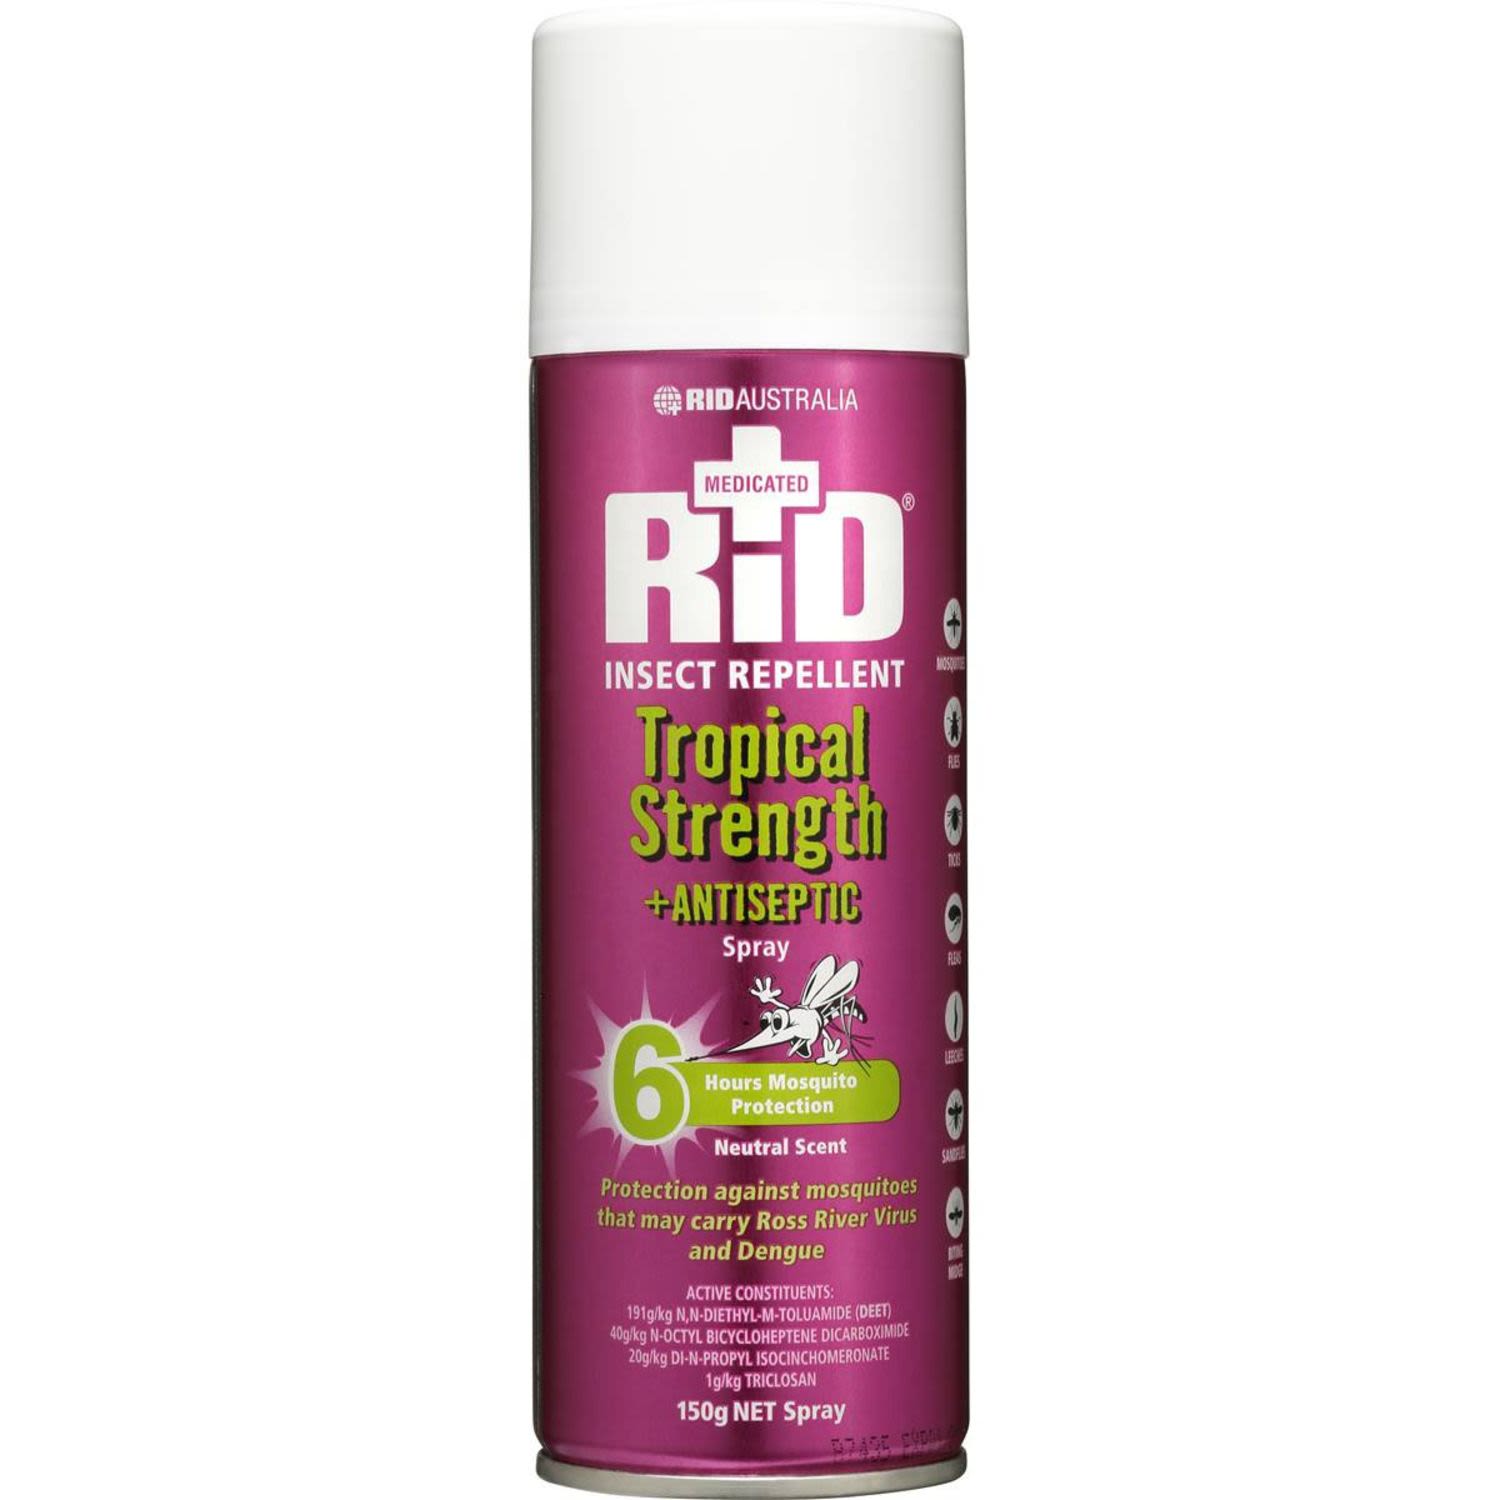 Rid Insect Repellent Tropical Strength Spray, 150 Gram